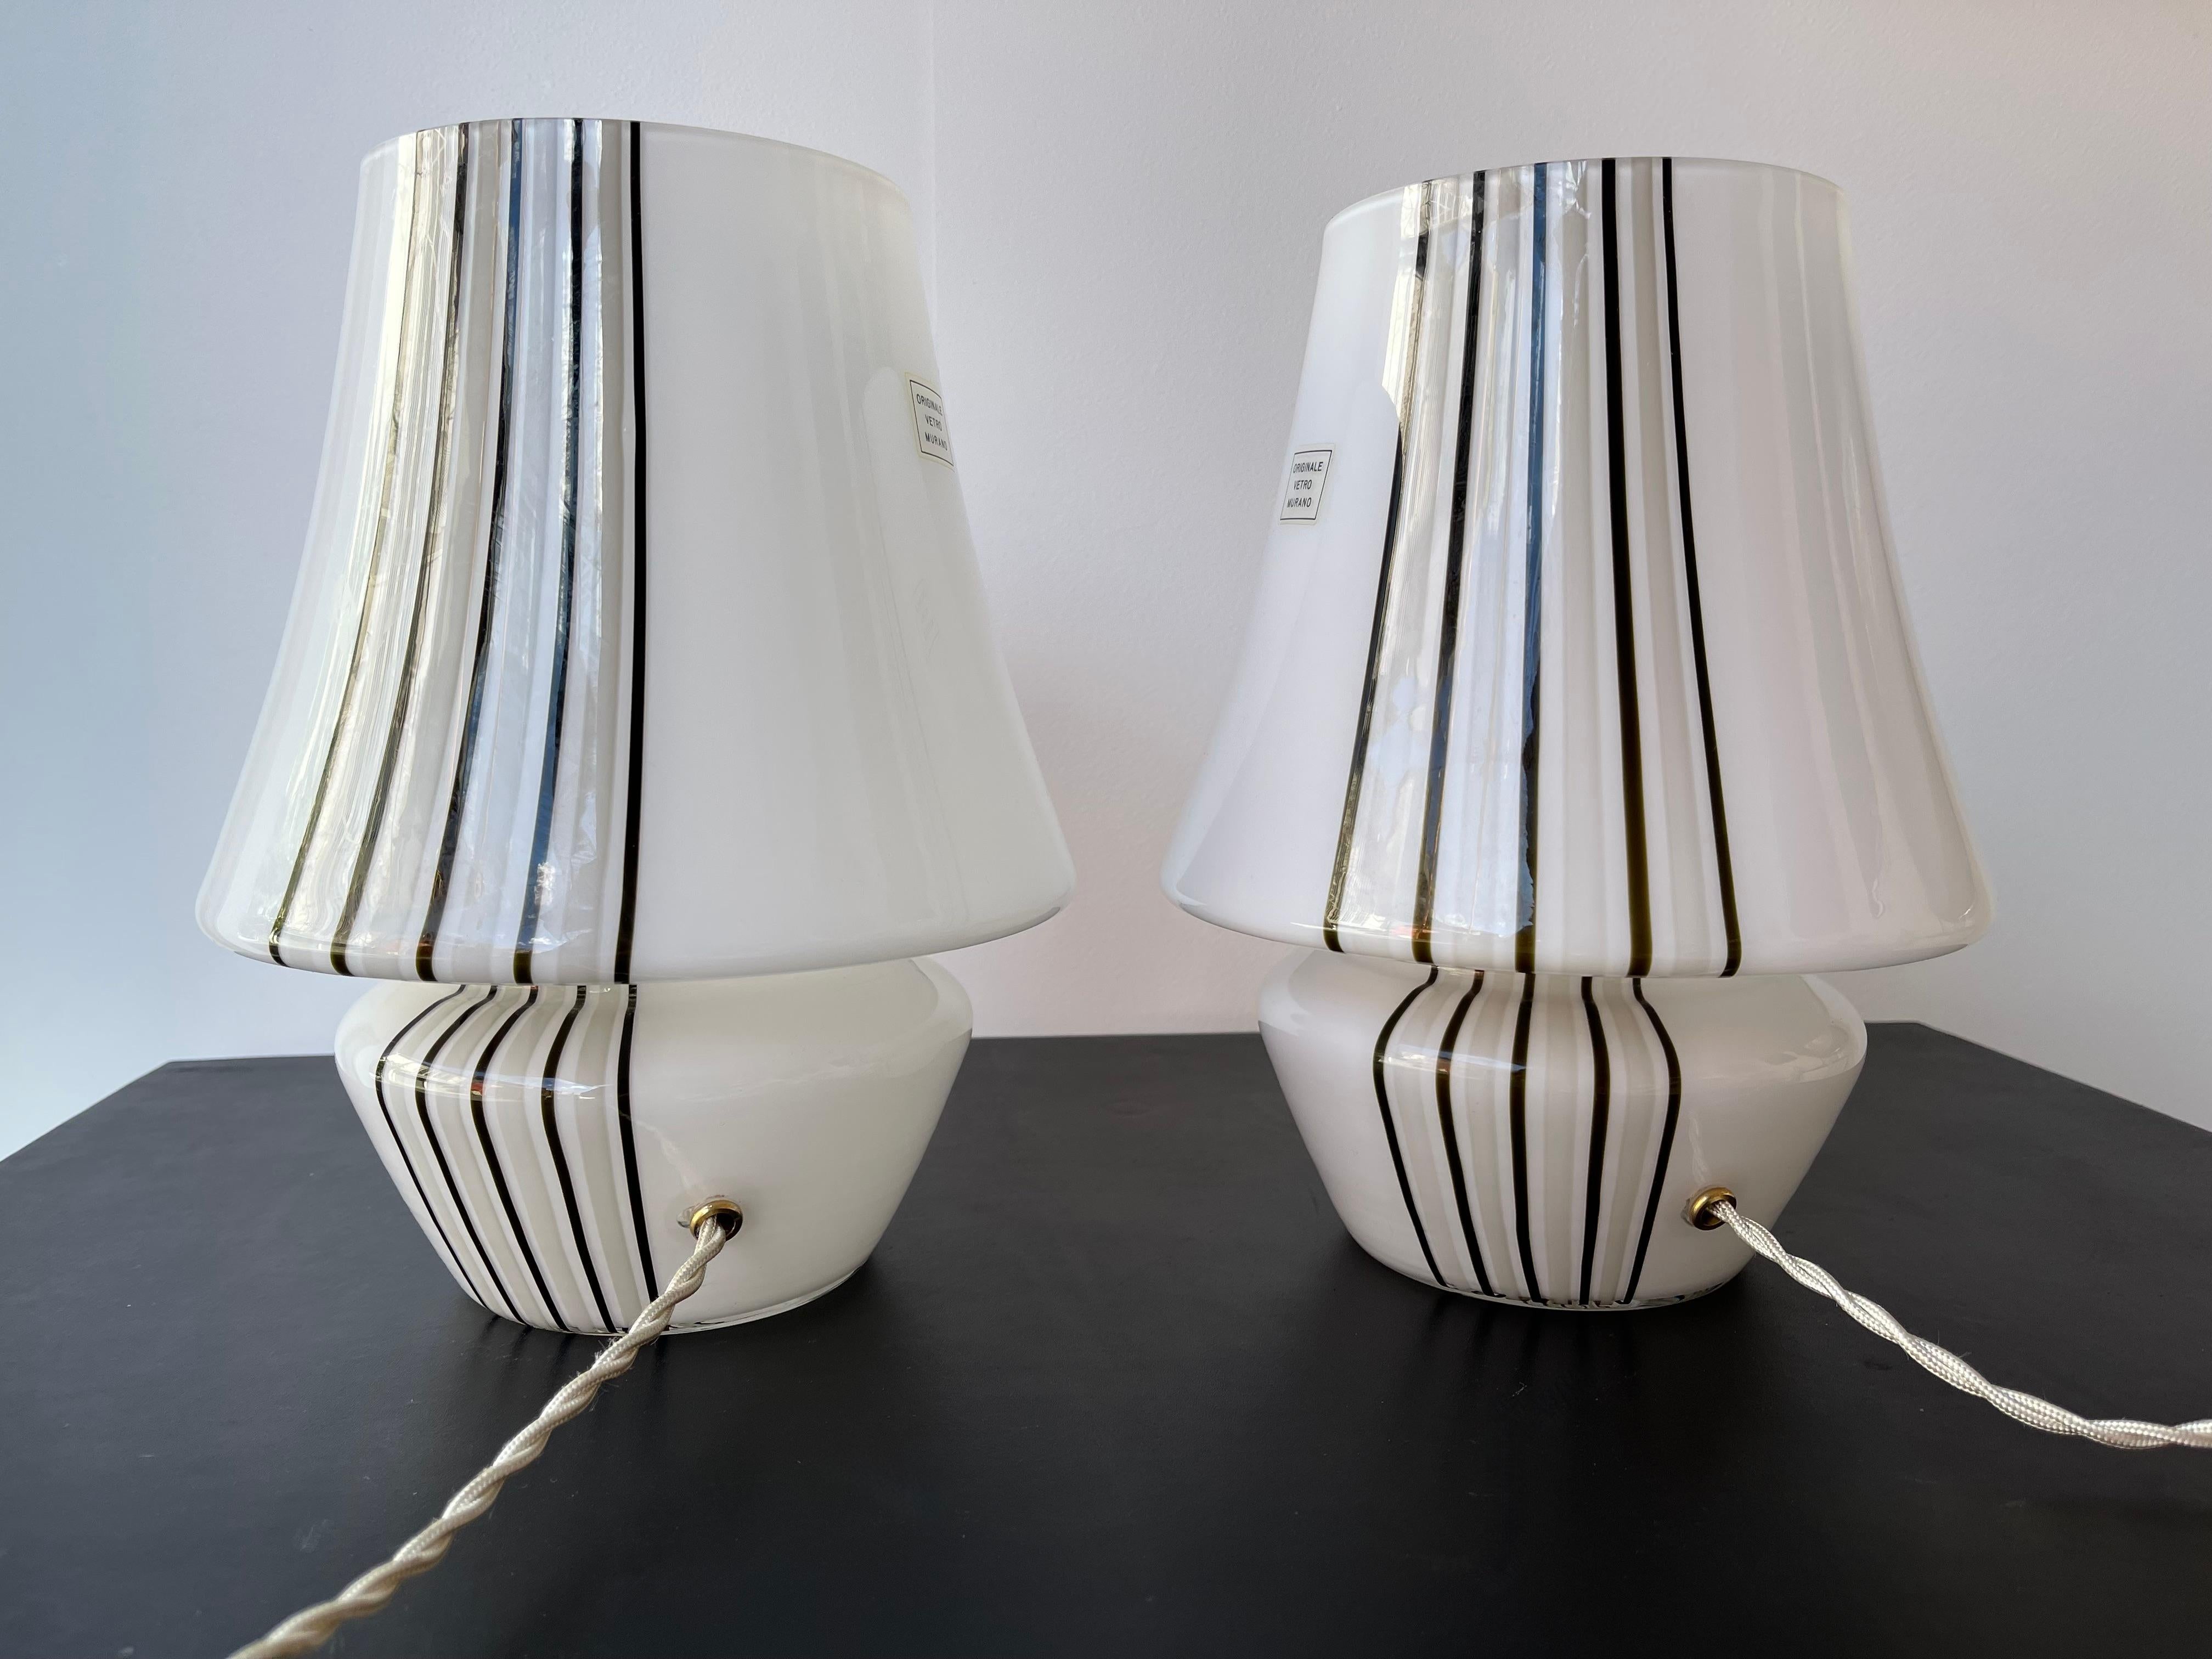 Pair of Stripe Murano Glass Lamps, Italy, 1970s For Sale 5